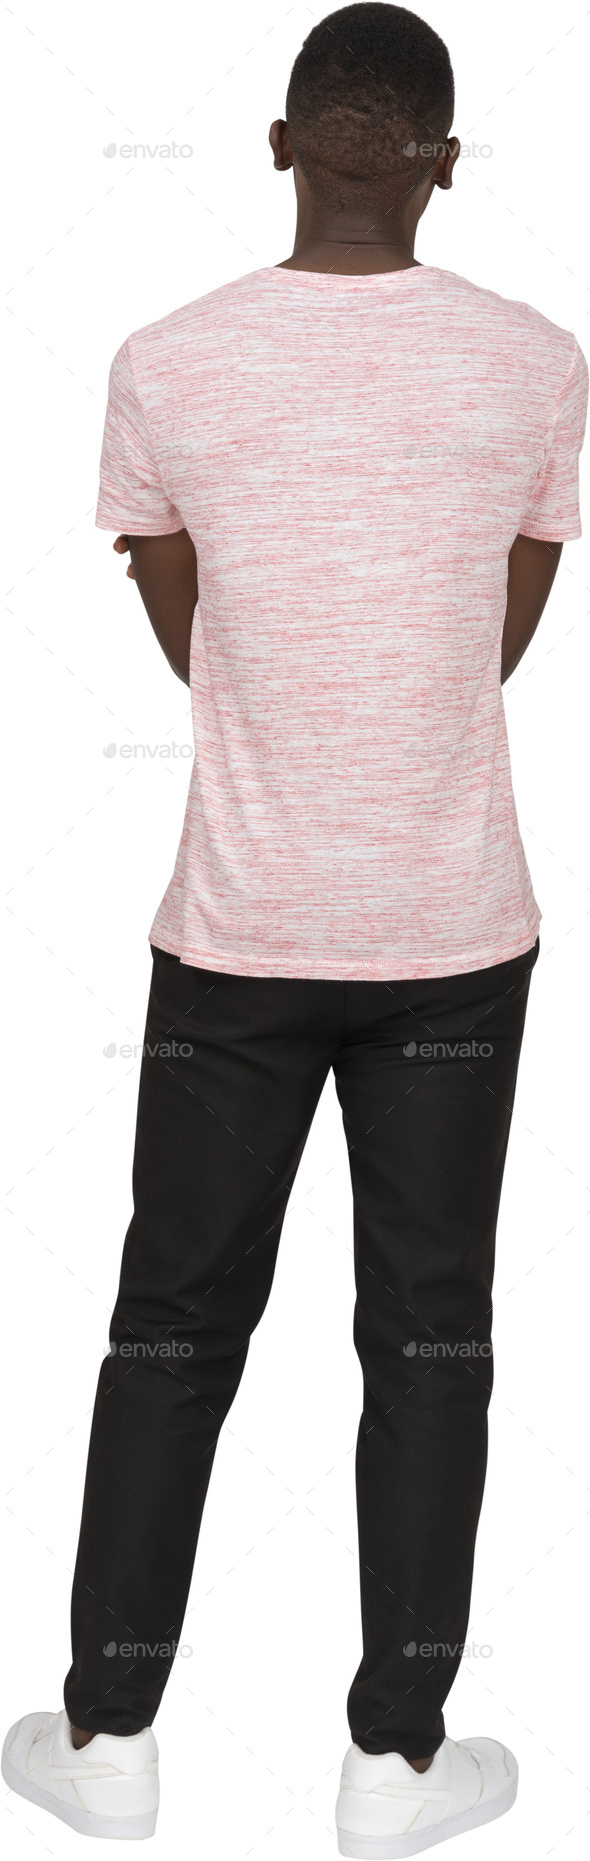 Free Photos - A Woman Wearing A White Shirt And Pink Pants